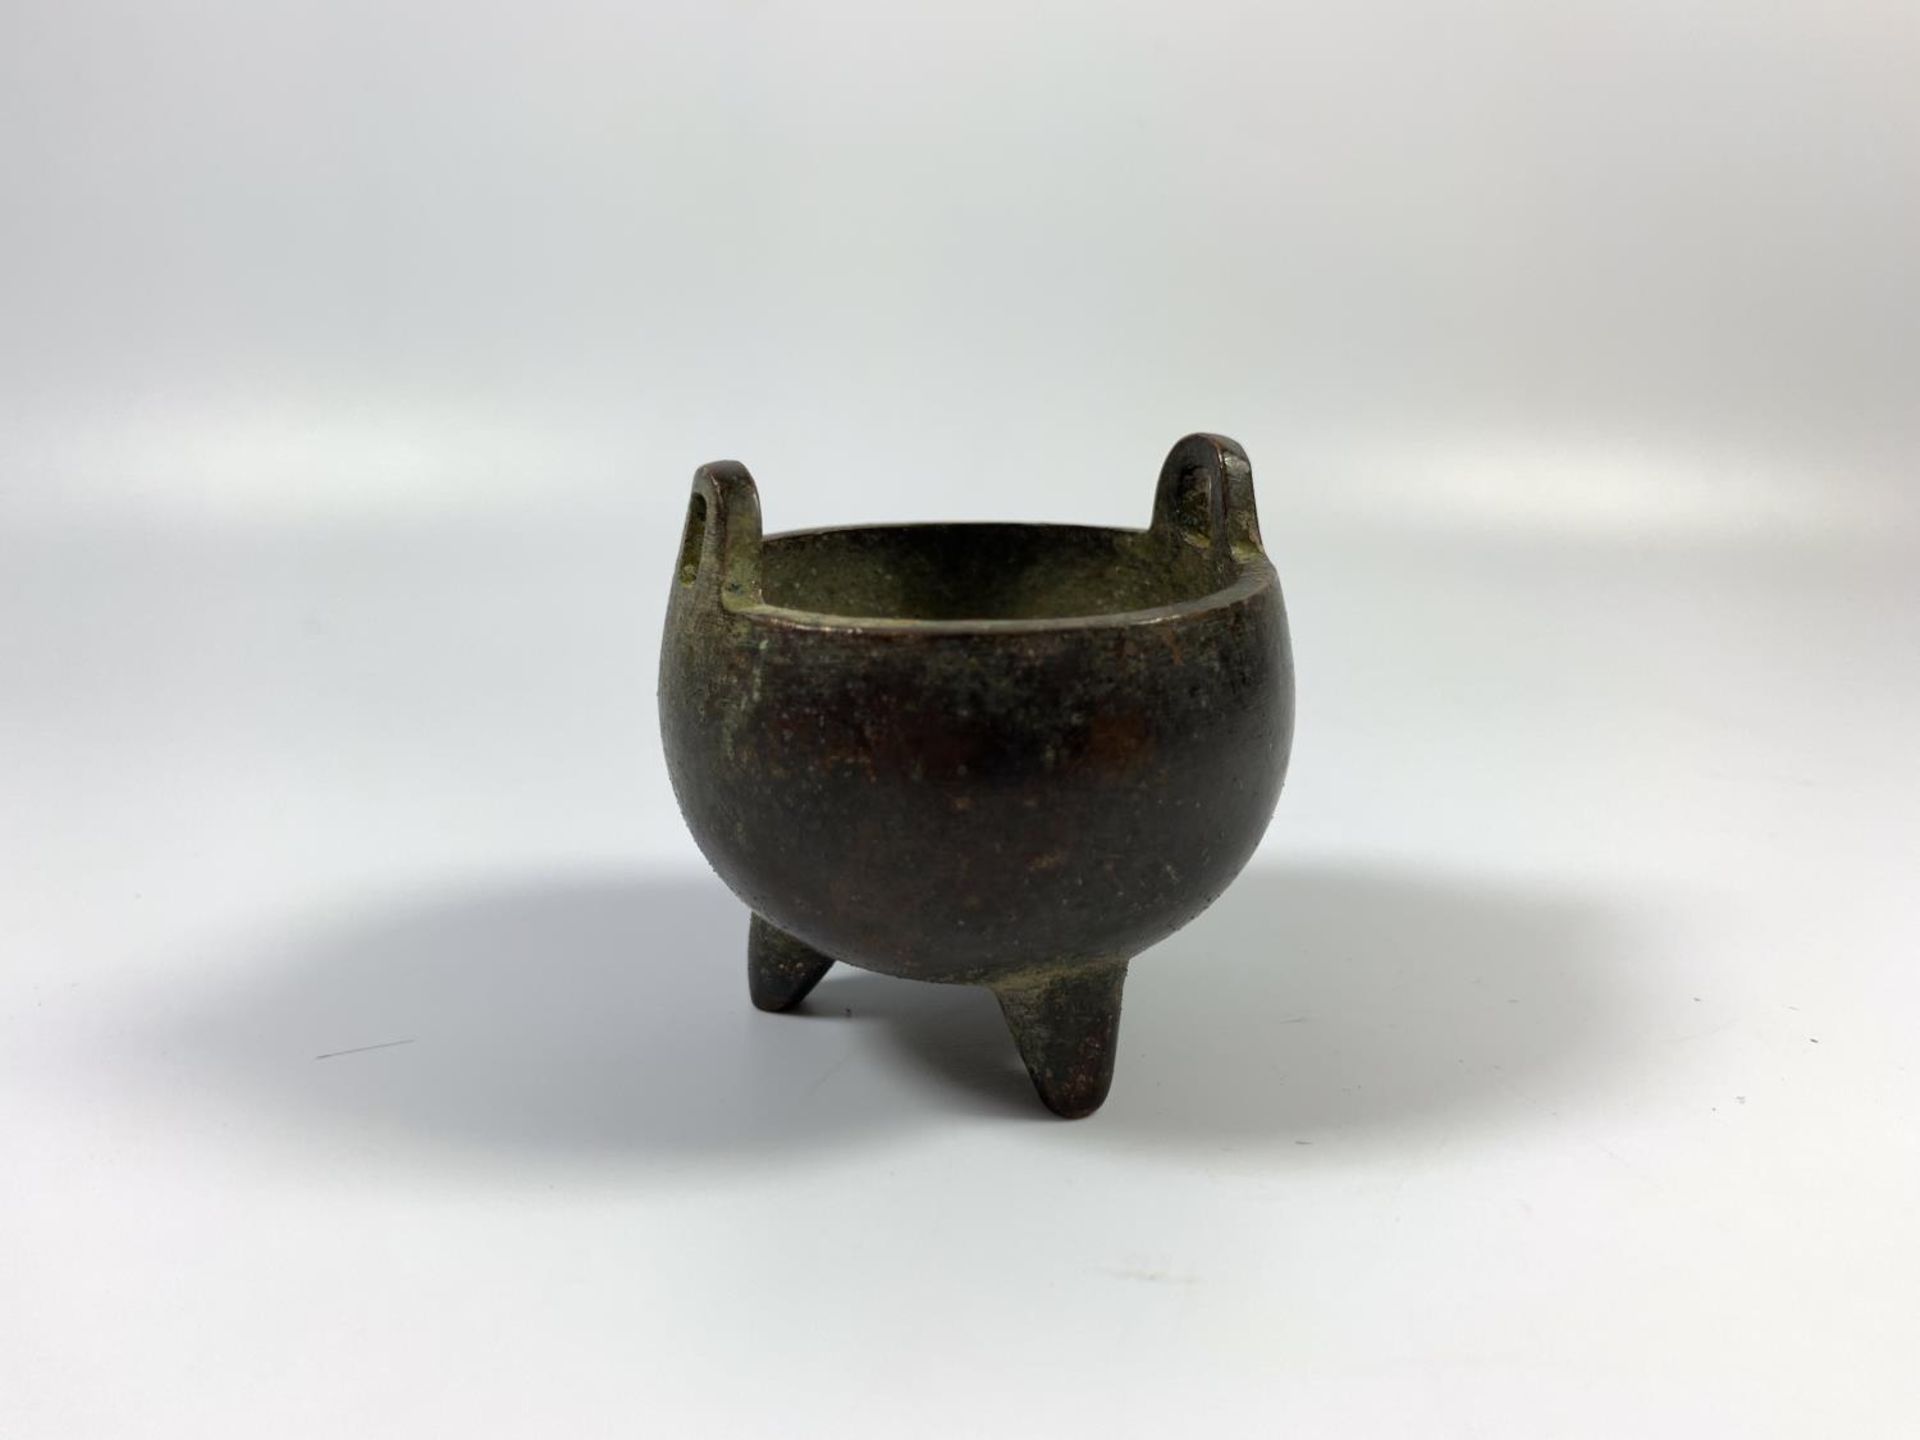 A MINIATURE 19TH CENTURY STYLE BRONZE TWIN HANDLED CENSOR, FOUR CHARACTER MARK TO BASE, HEIGHT 5CM - Image 2 of 4